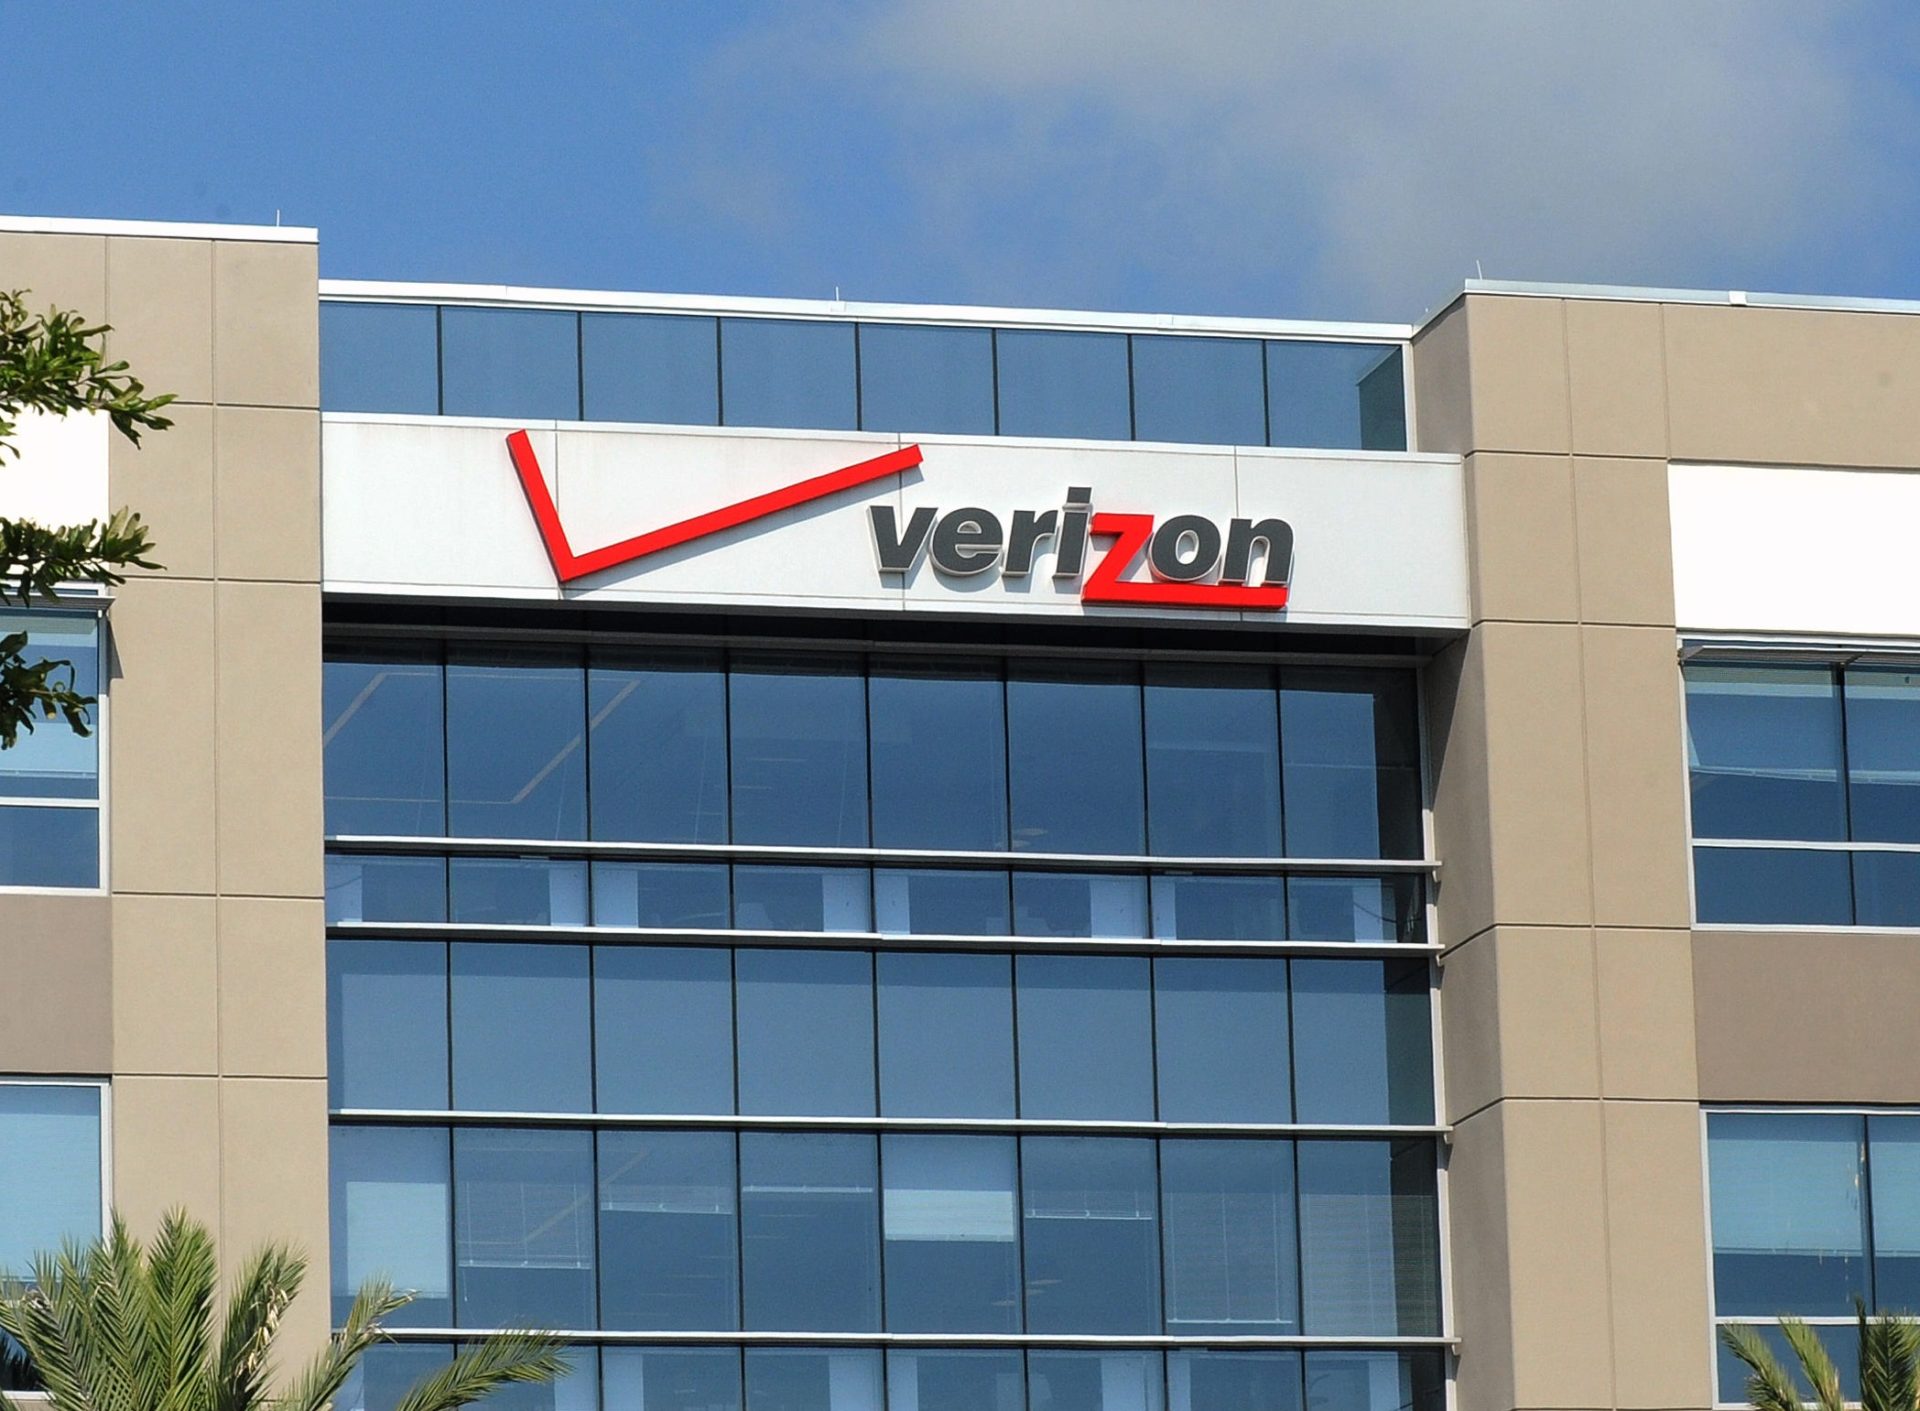 A Verizon finance centre in the US state of Florida, 31-5-16